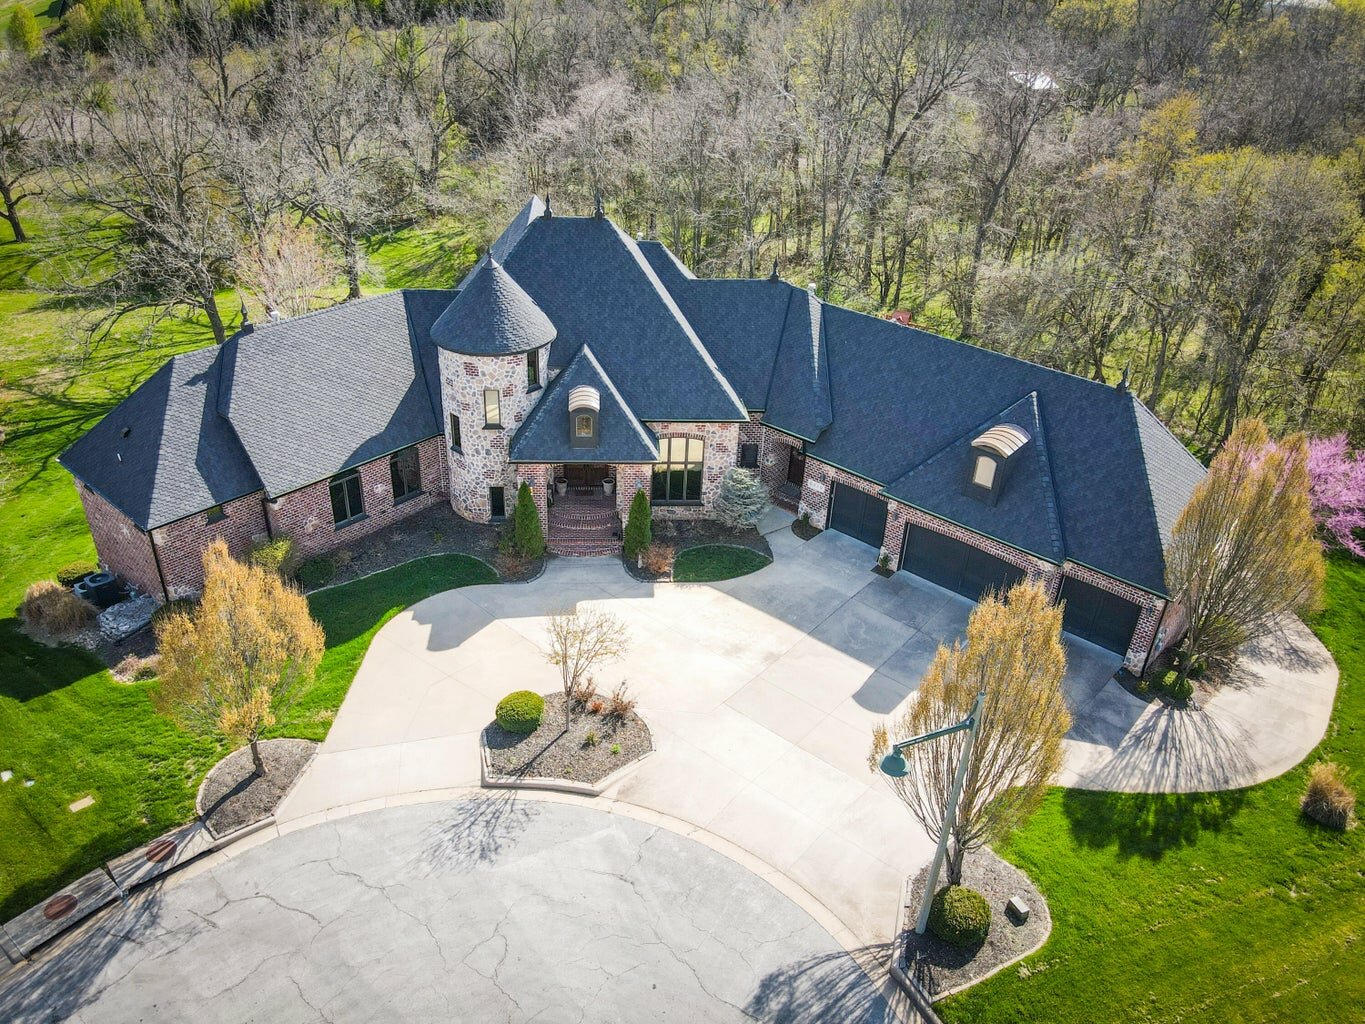 6289 S. Parkhaven Lane
$1,099,000
Bedrooms: 7
Bathrooms: 5
Listing firm: Old World Realty LLC